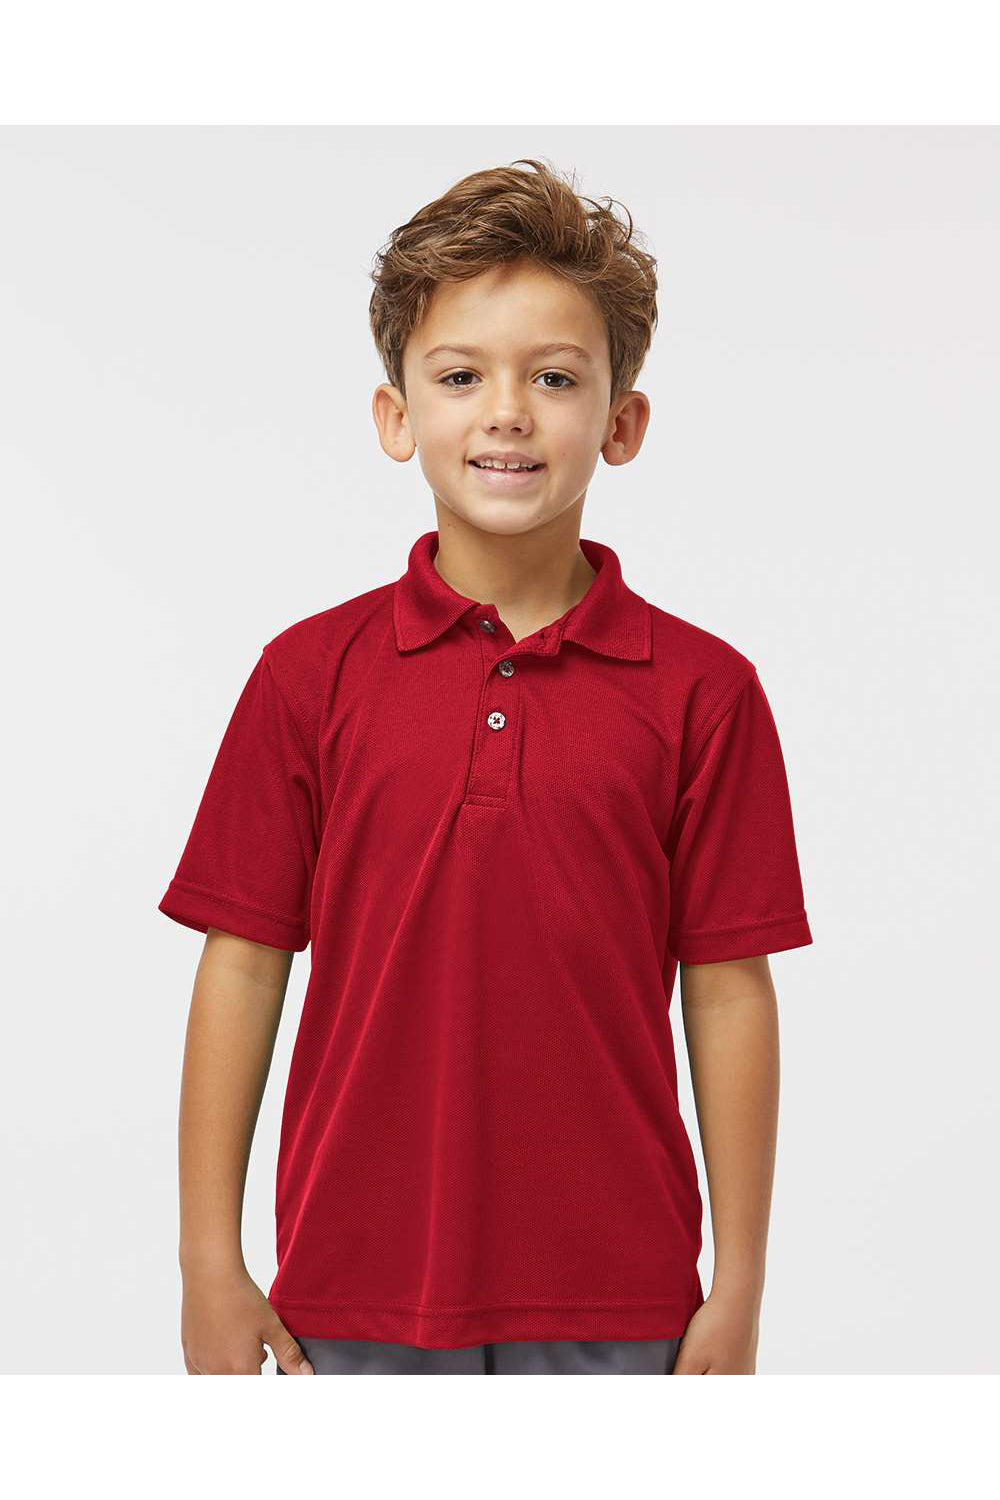 Paragon 108Y Youth Saratoga Performance Mini Mesh Short Sleeve Polo Shirt Red Model Front